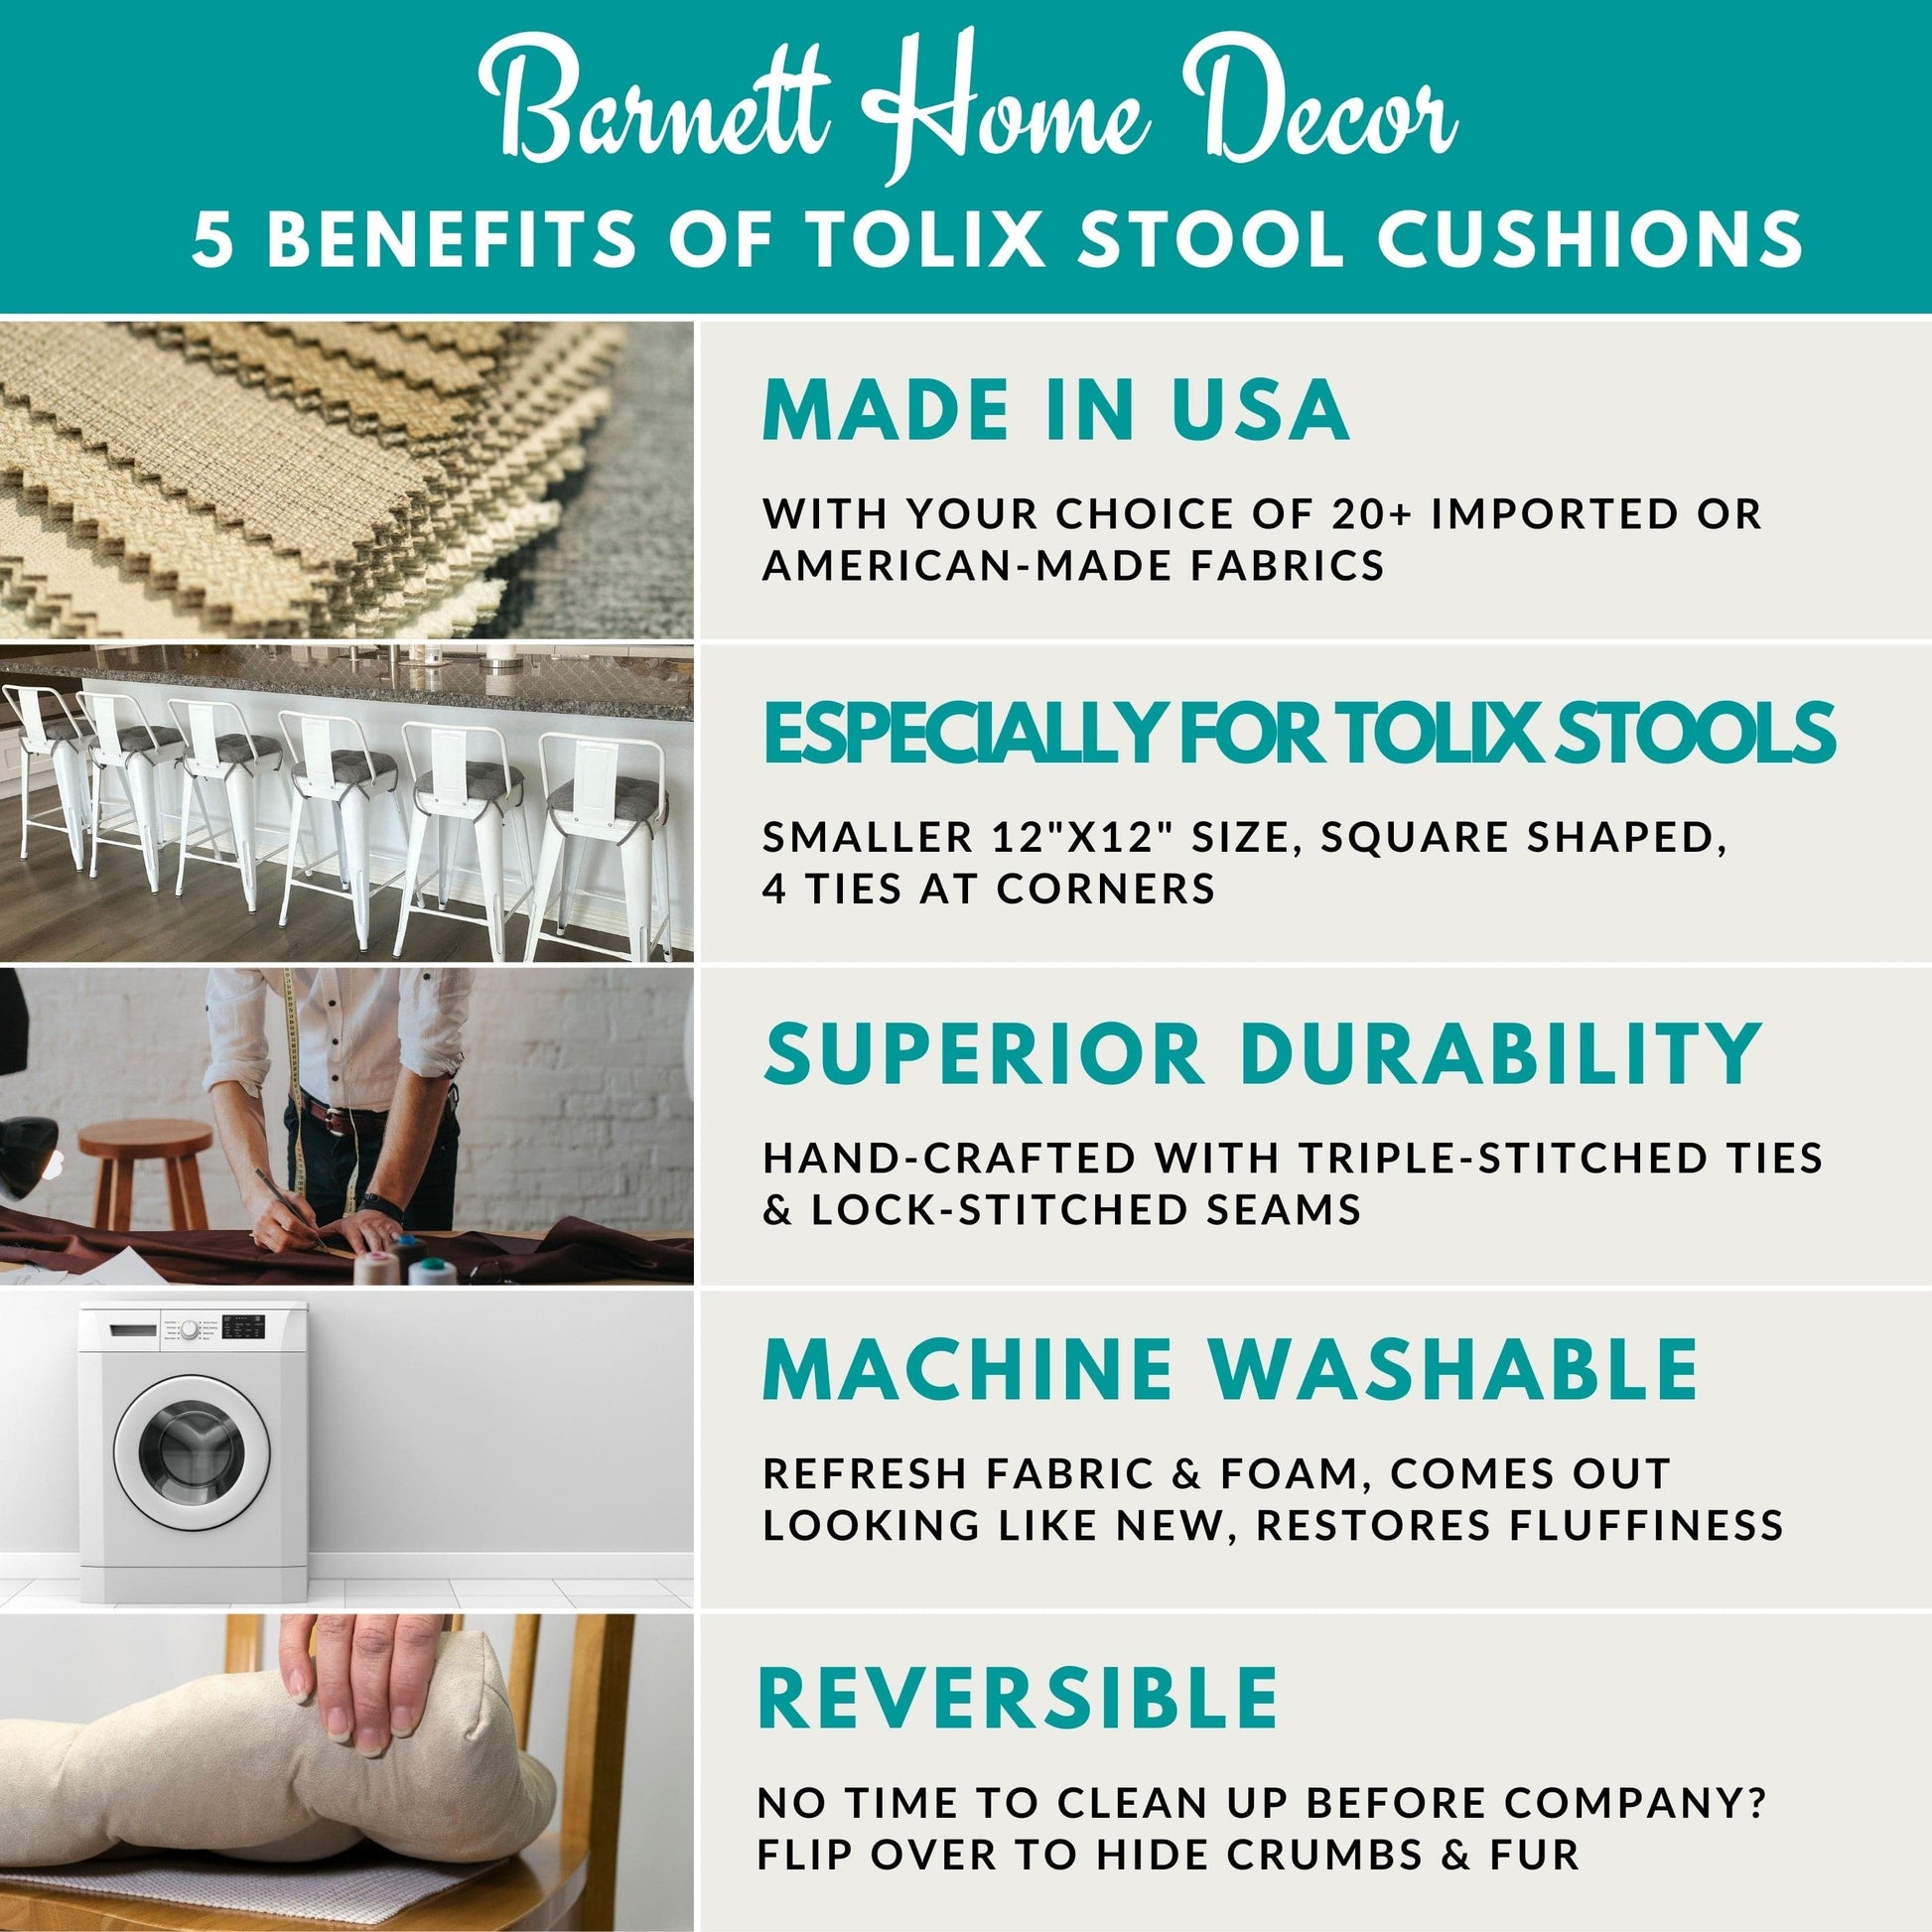 Barnett Home Decor Benefits of Tolix Stool Cushions, Made in USA, Made for Tolix Stools, Superior Durability, Machine Washable, Reversible 